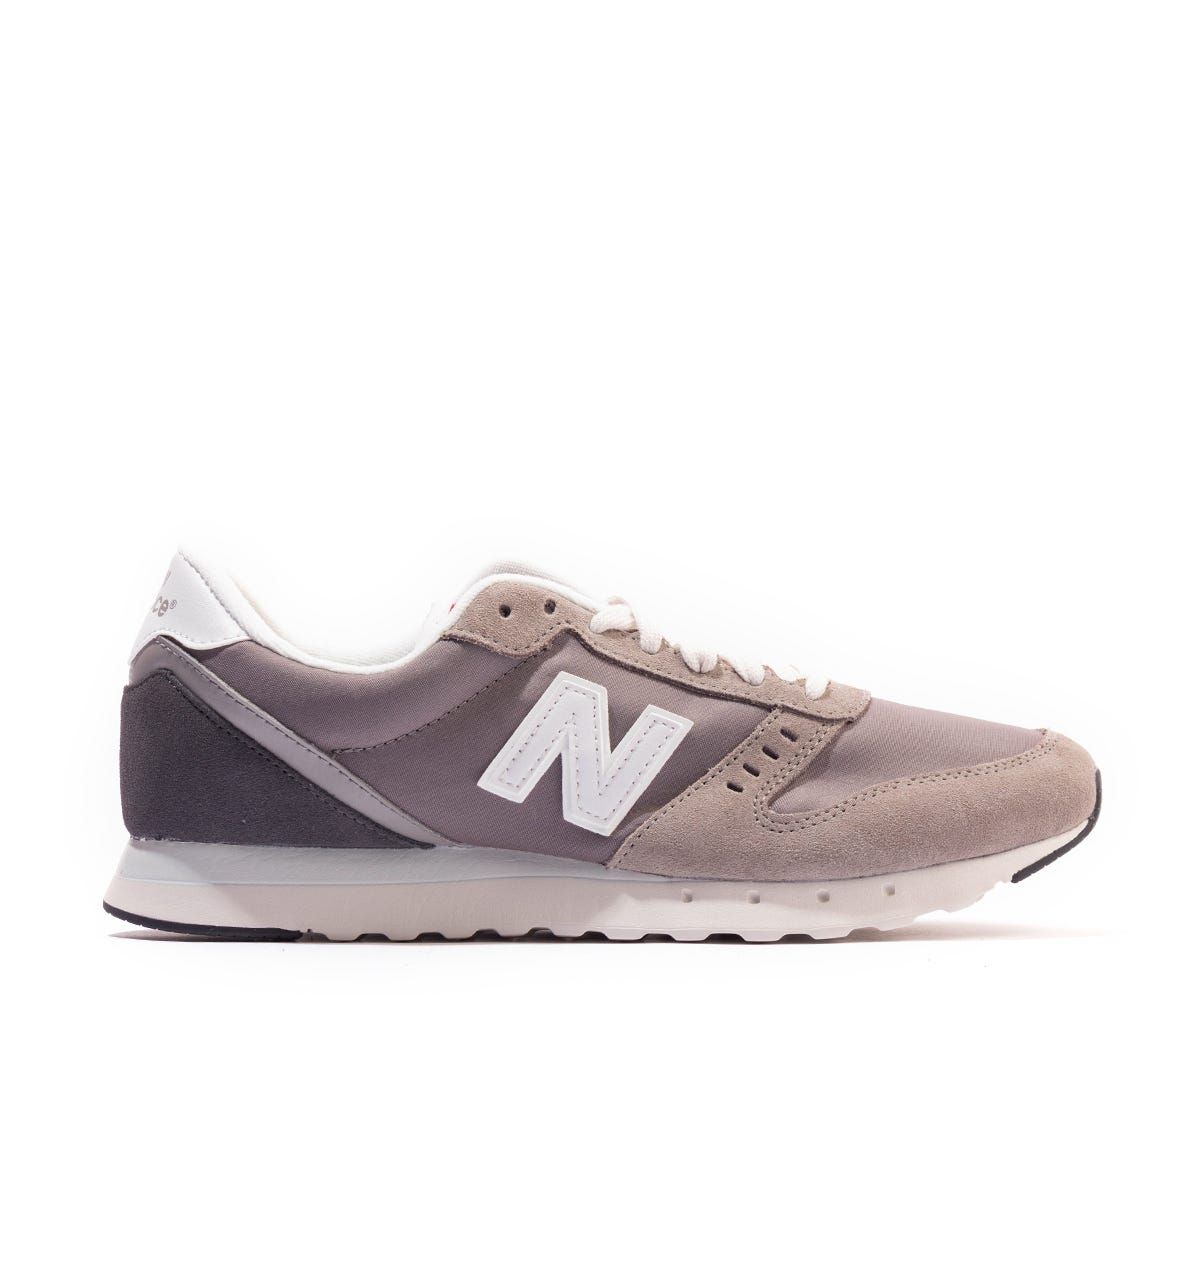 New Balance is an icon when it comes to footwear, renowned for creating innovative, stylish, comfortable trainers. The signature N logo has ties within baseball, boxing and running; they don\'t just look great but they enhance the performance of the wearer. A confidence-boosting addition to any wardrobe. Men\'s 311v2 New Balance trainersSuede & Nylon UppersTextile LiningRubber OutsoleCush+ Midsole CushioningGround Contact IMEVA CushioningMemory Sole Comfort InsertsSecure Lace-up ClosureNew Balance Branding